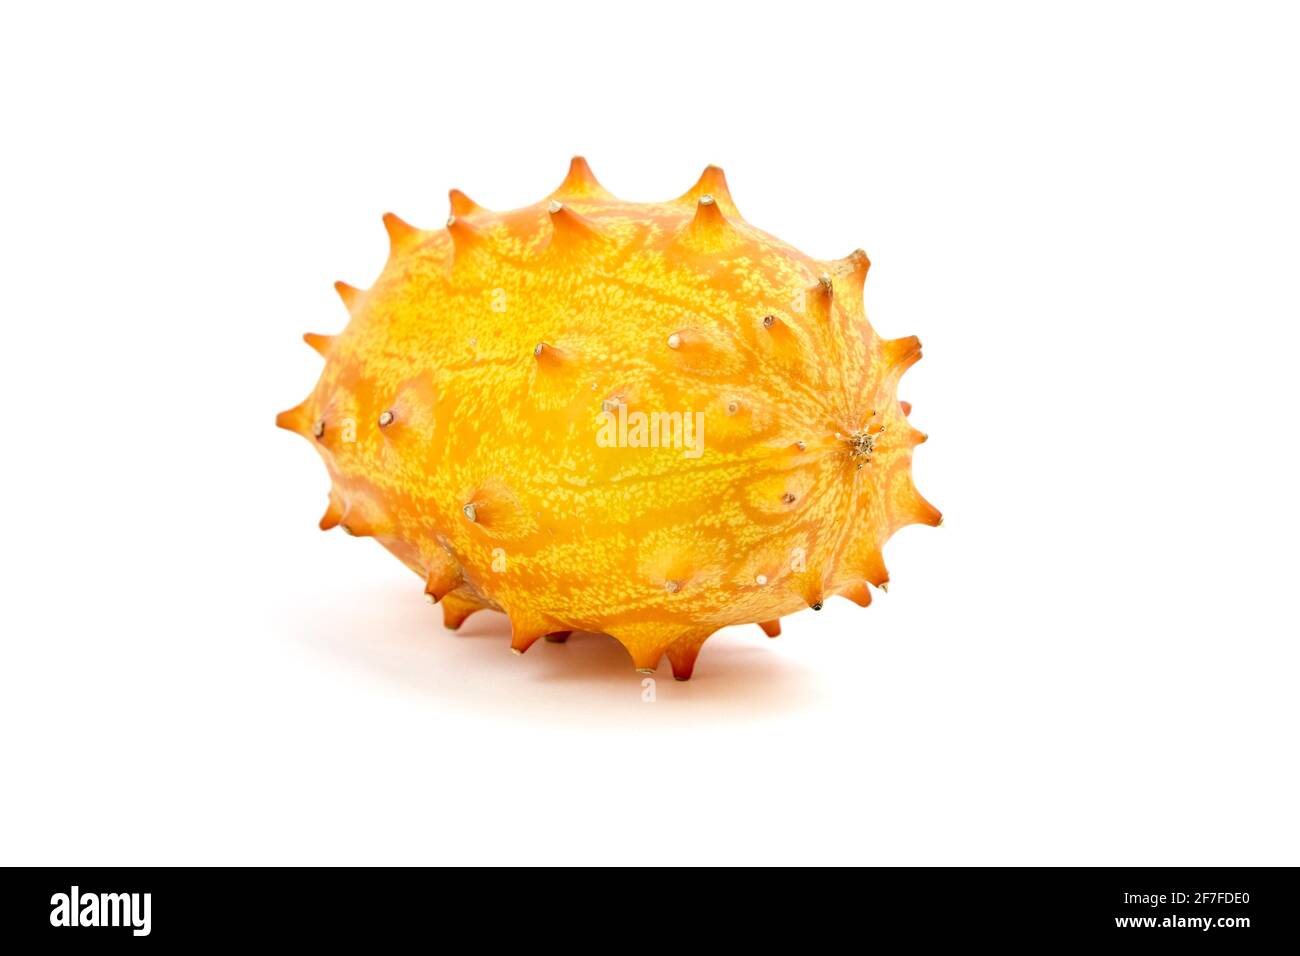 Kiwano melon fruit or Horned Melon isolated on white backgroud. A single African horned cucumber Stock Photo